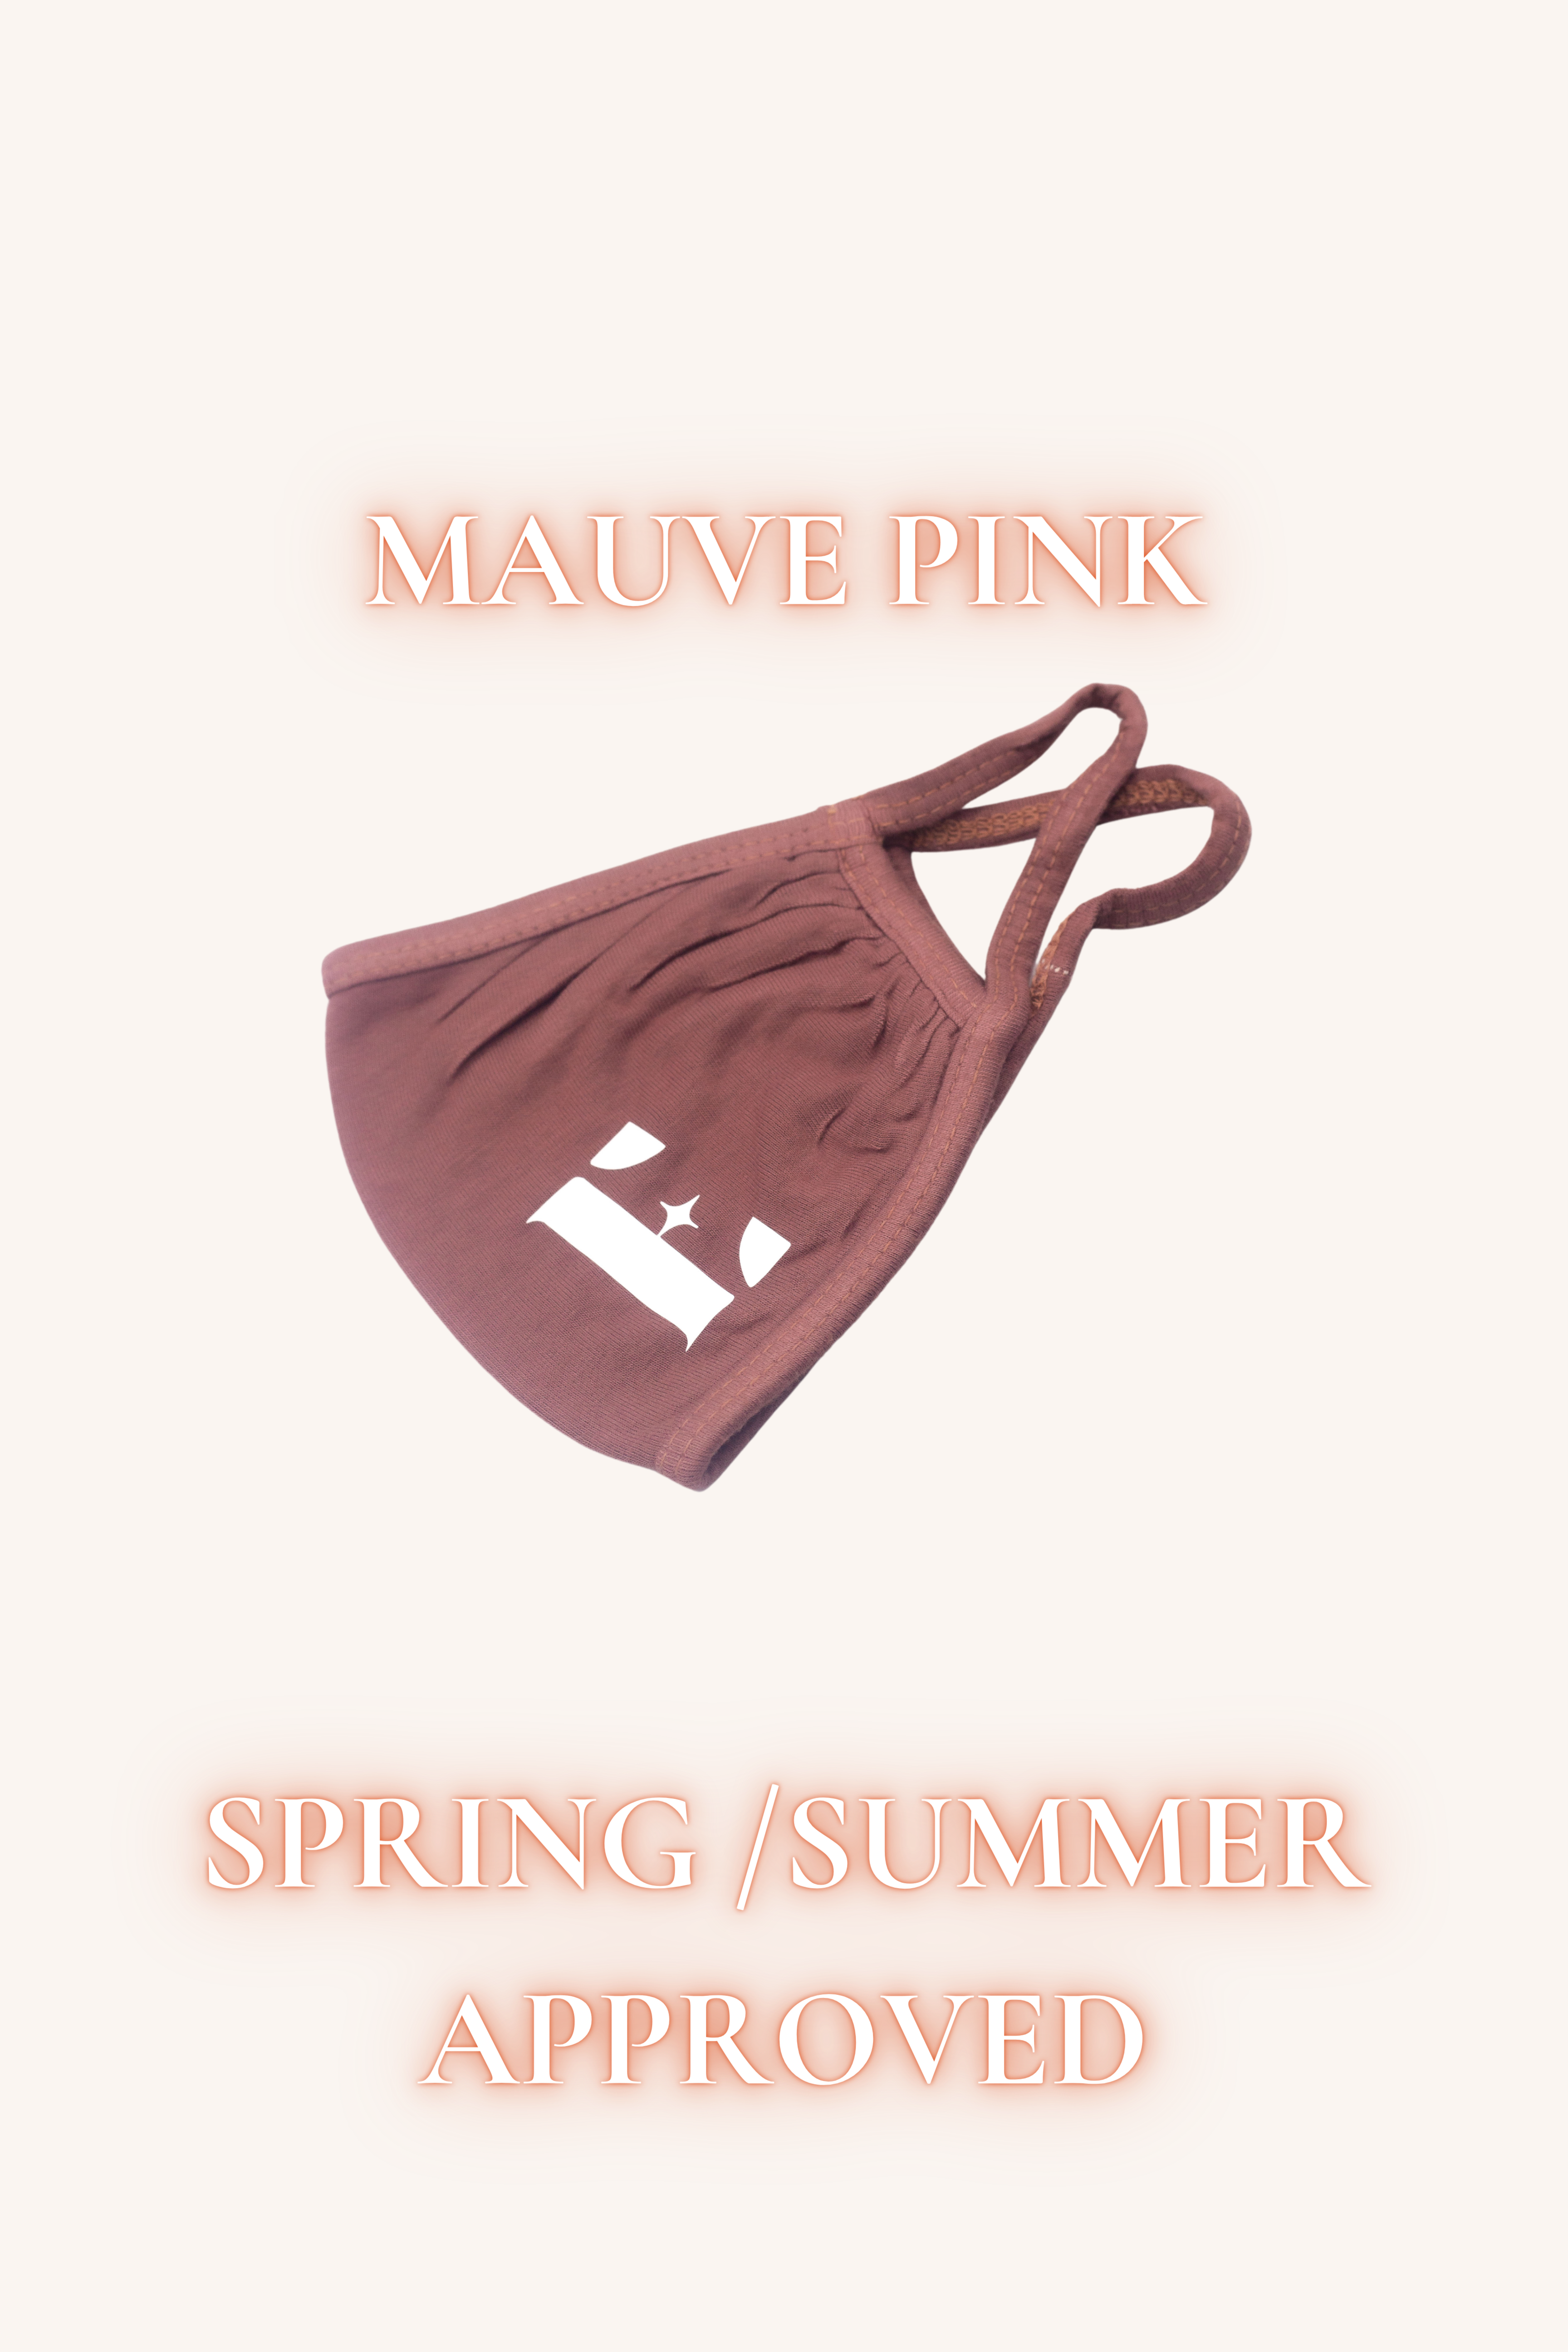 Mauve pink face mask with the E's Element logo imprinted in white. Above the mask is the word "CINNAMON". Below the mask are the words, "SPRING/SUMMER APPROVED". Reusable Masks (5 Piece) by E's Element.